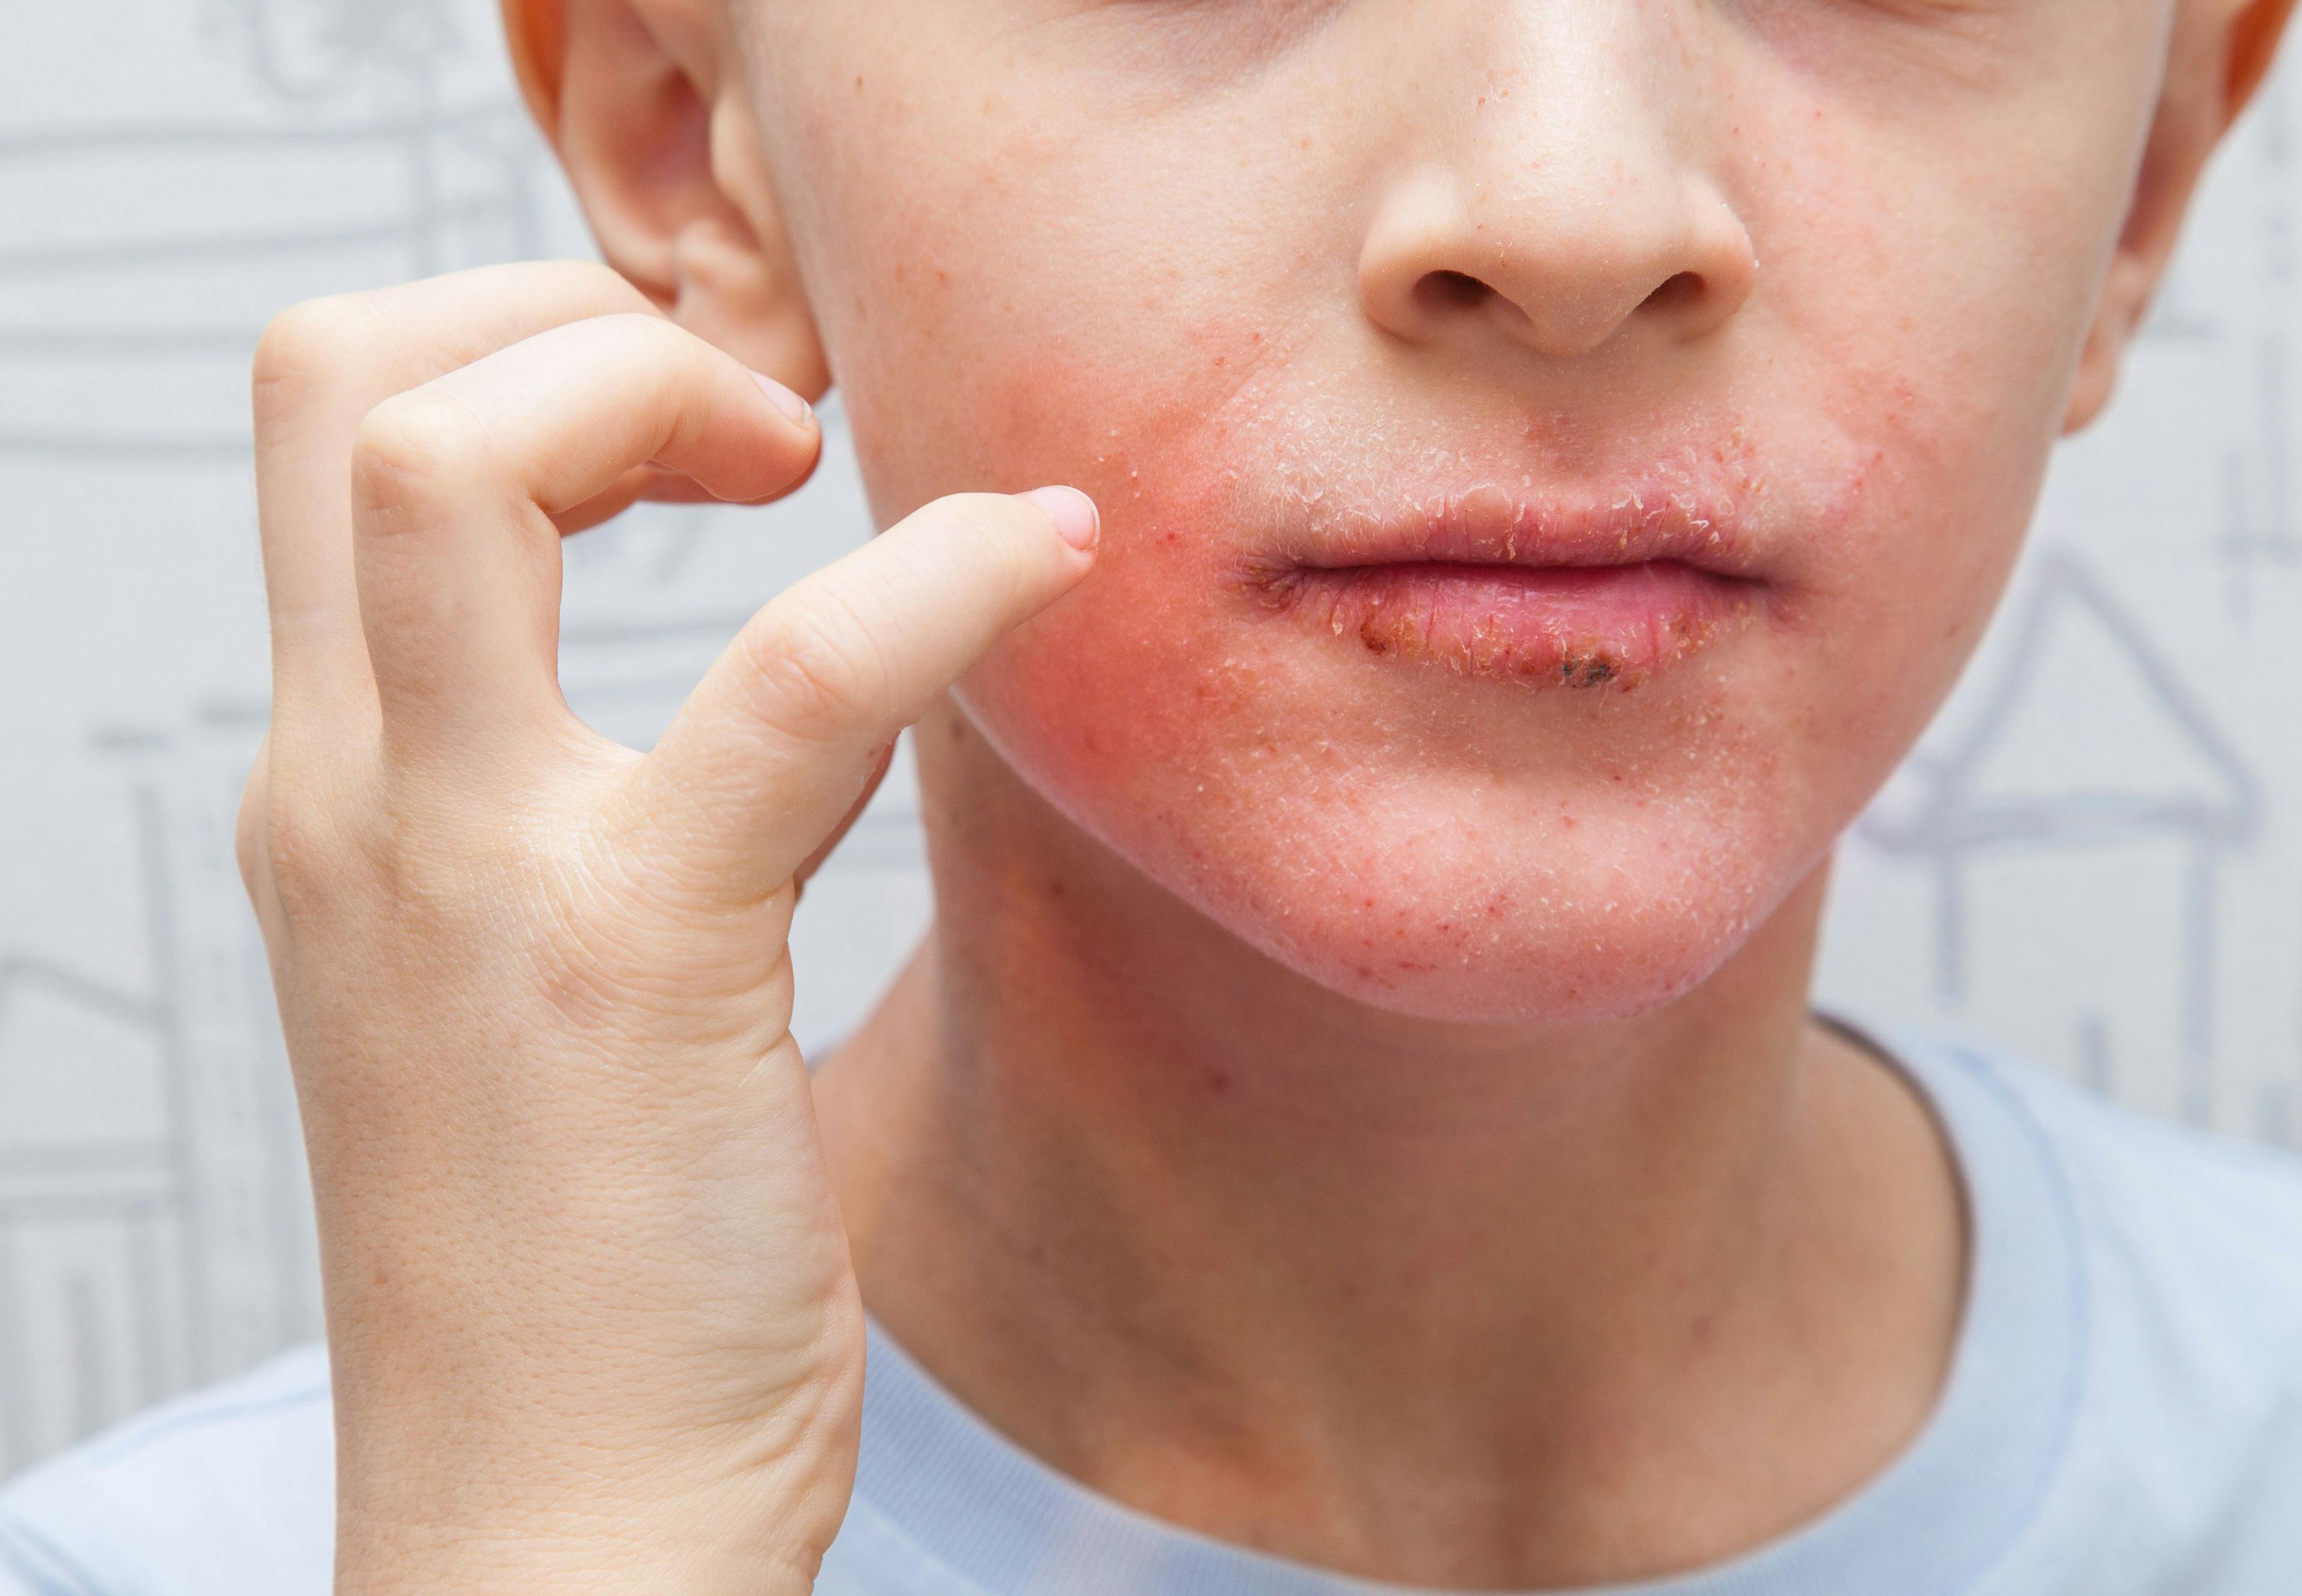 Tralokinumab Found to be Efficacious in Adolescents With Moderate to Severe Atopic Dermatitis